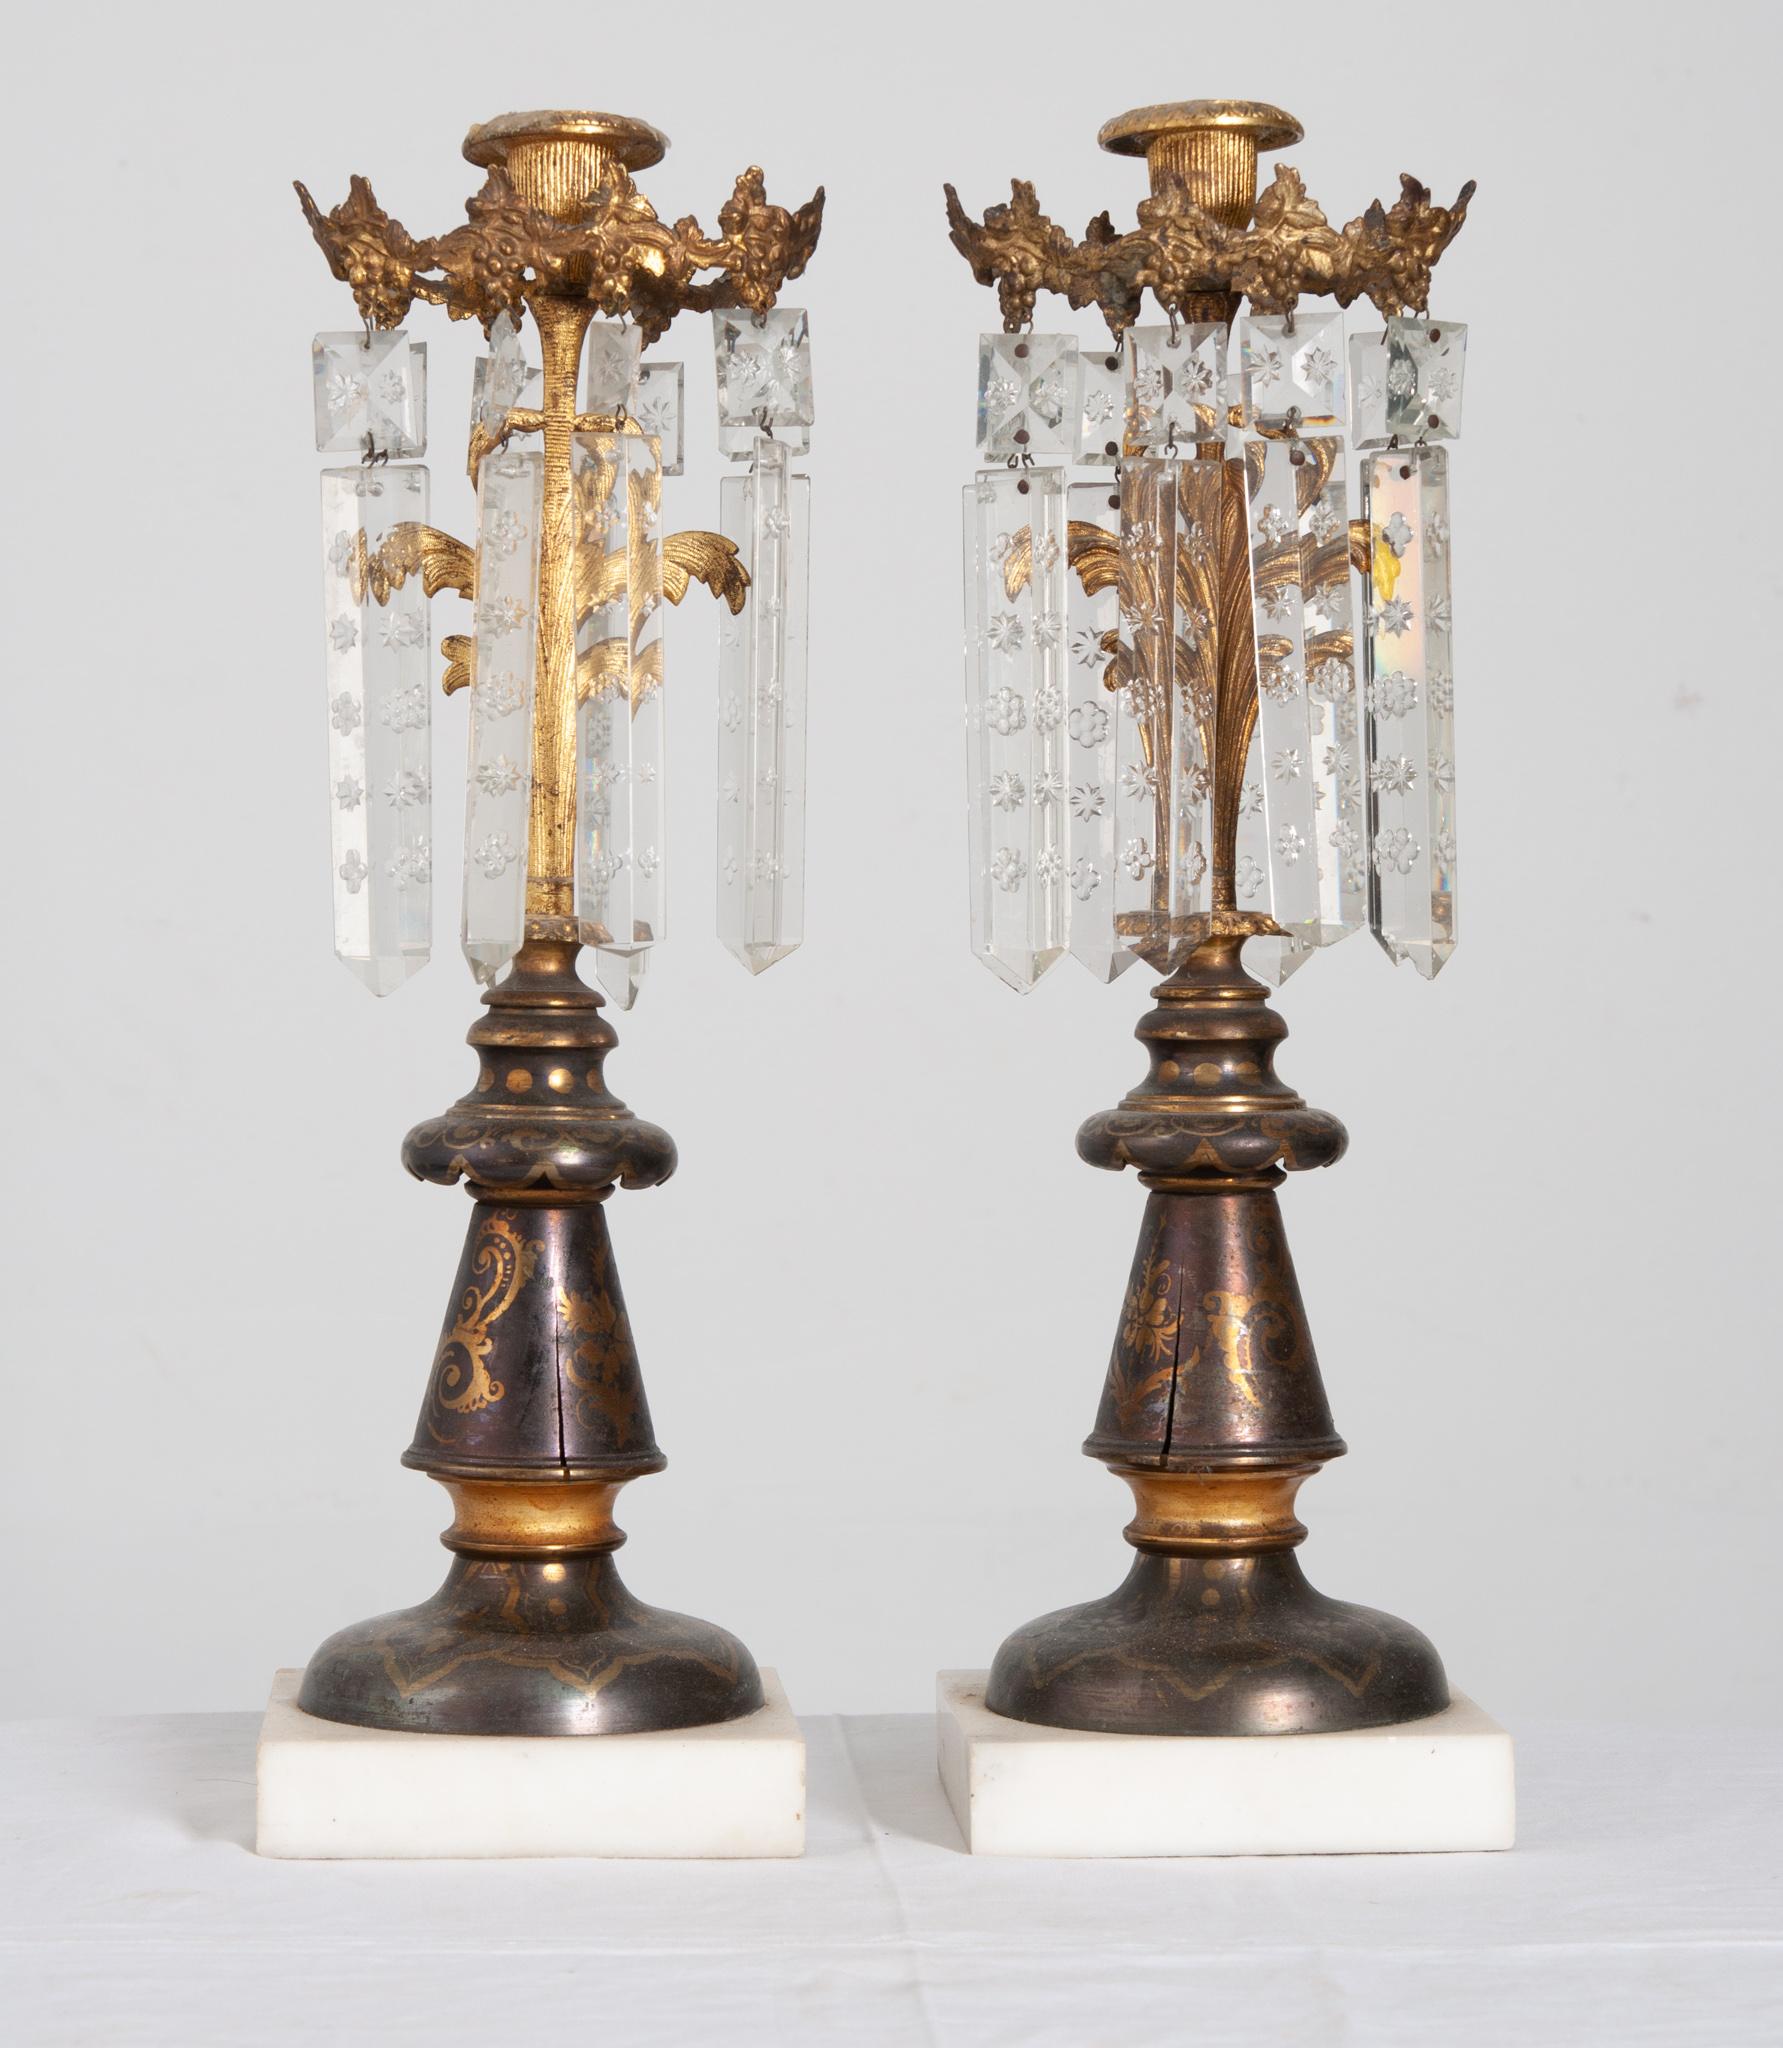 A stunning pair of metal candlestick holders with cut crystal drops and marble bases. The candle cups still have remnants of candles melted long ago. A gorgeous grape vine ring encircles the top and supports the crystal drops. Wonderfully detailed